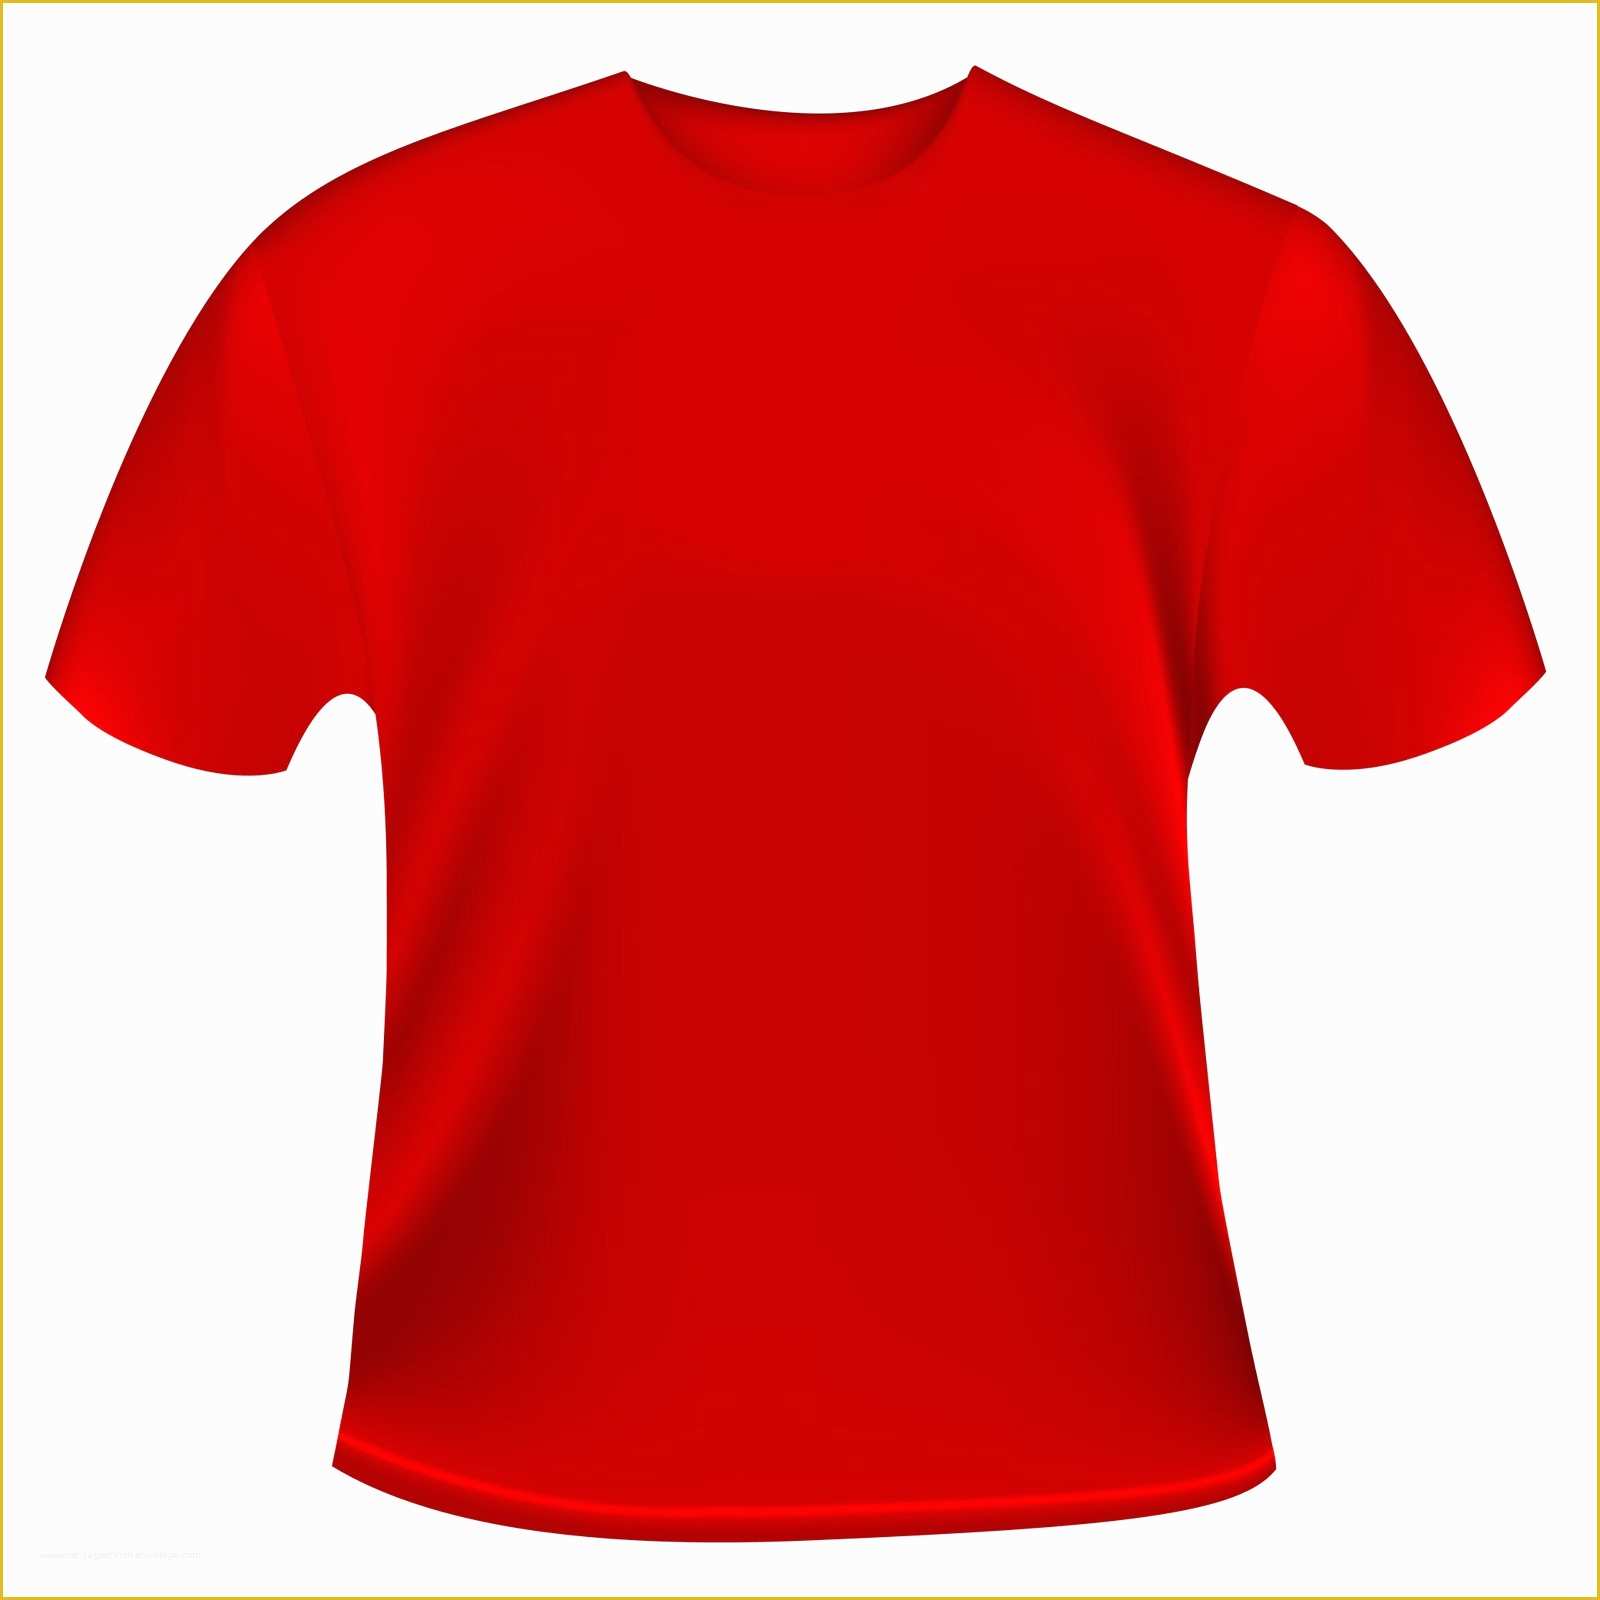 Free Shirt Templates Of Red Shirt Clipart Clipart Suggest ...